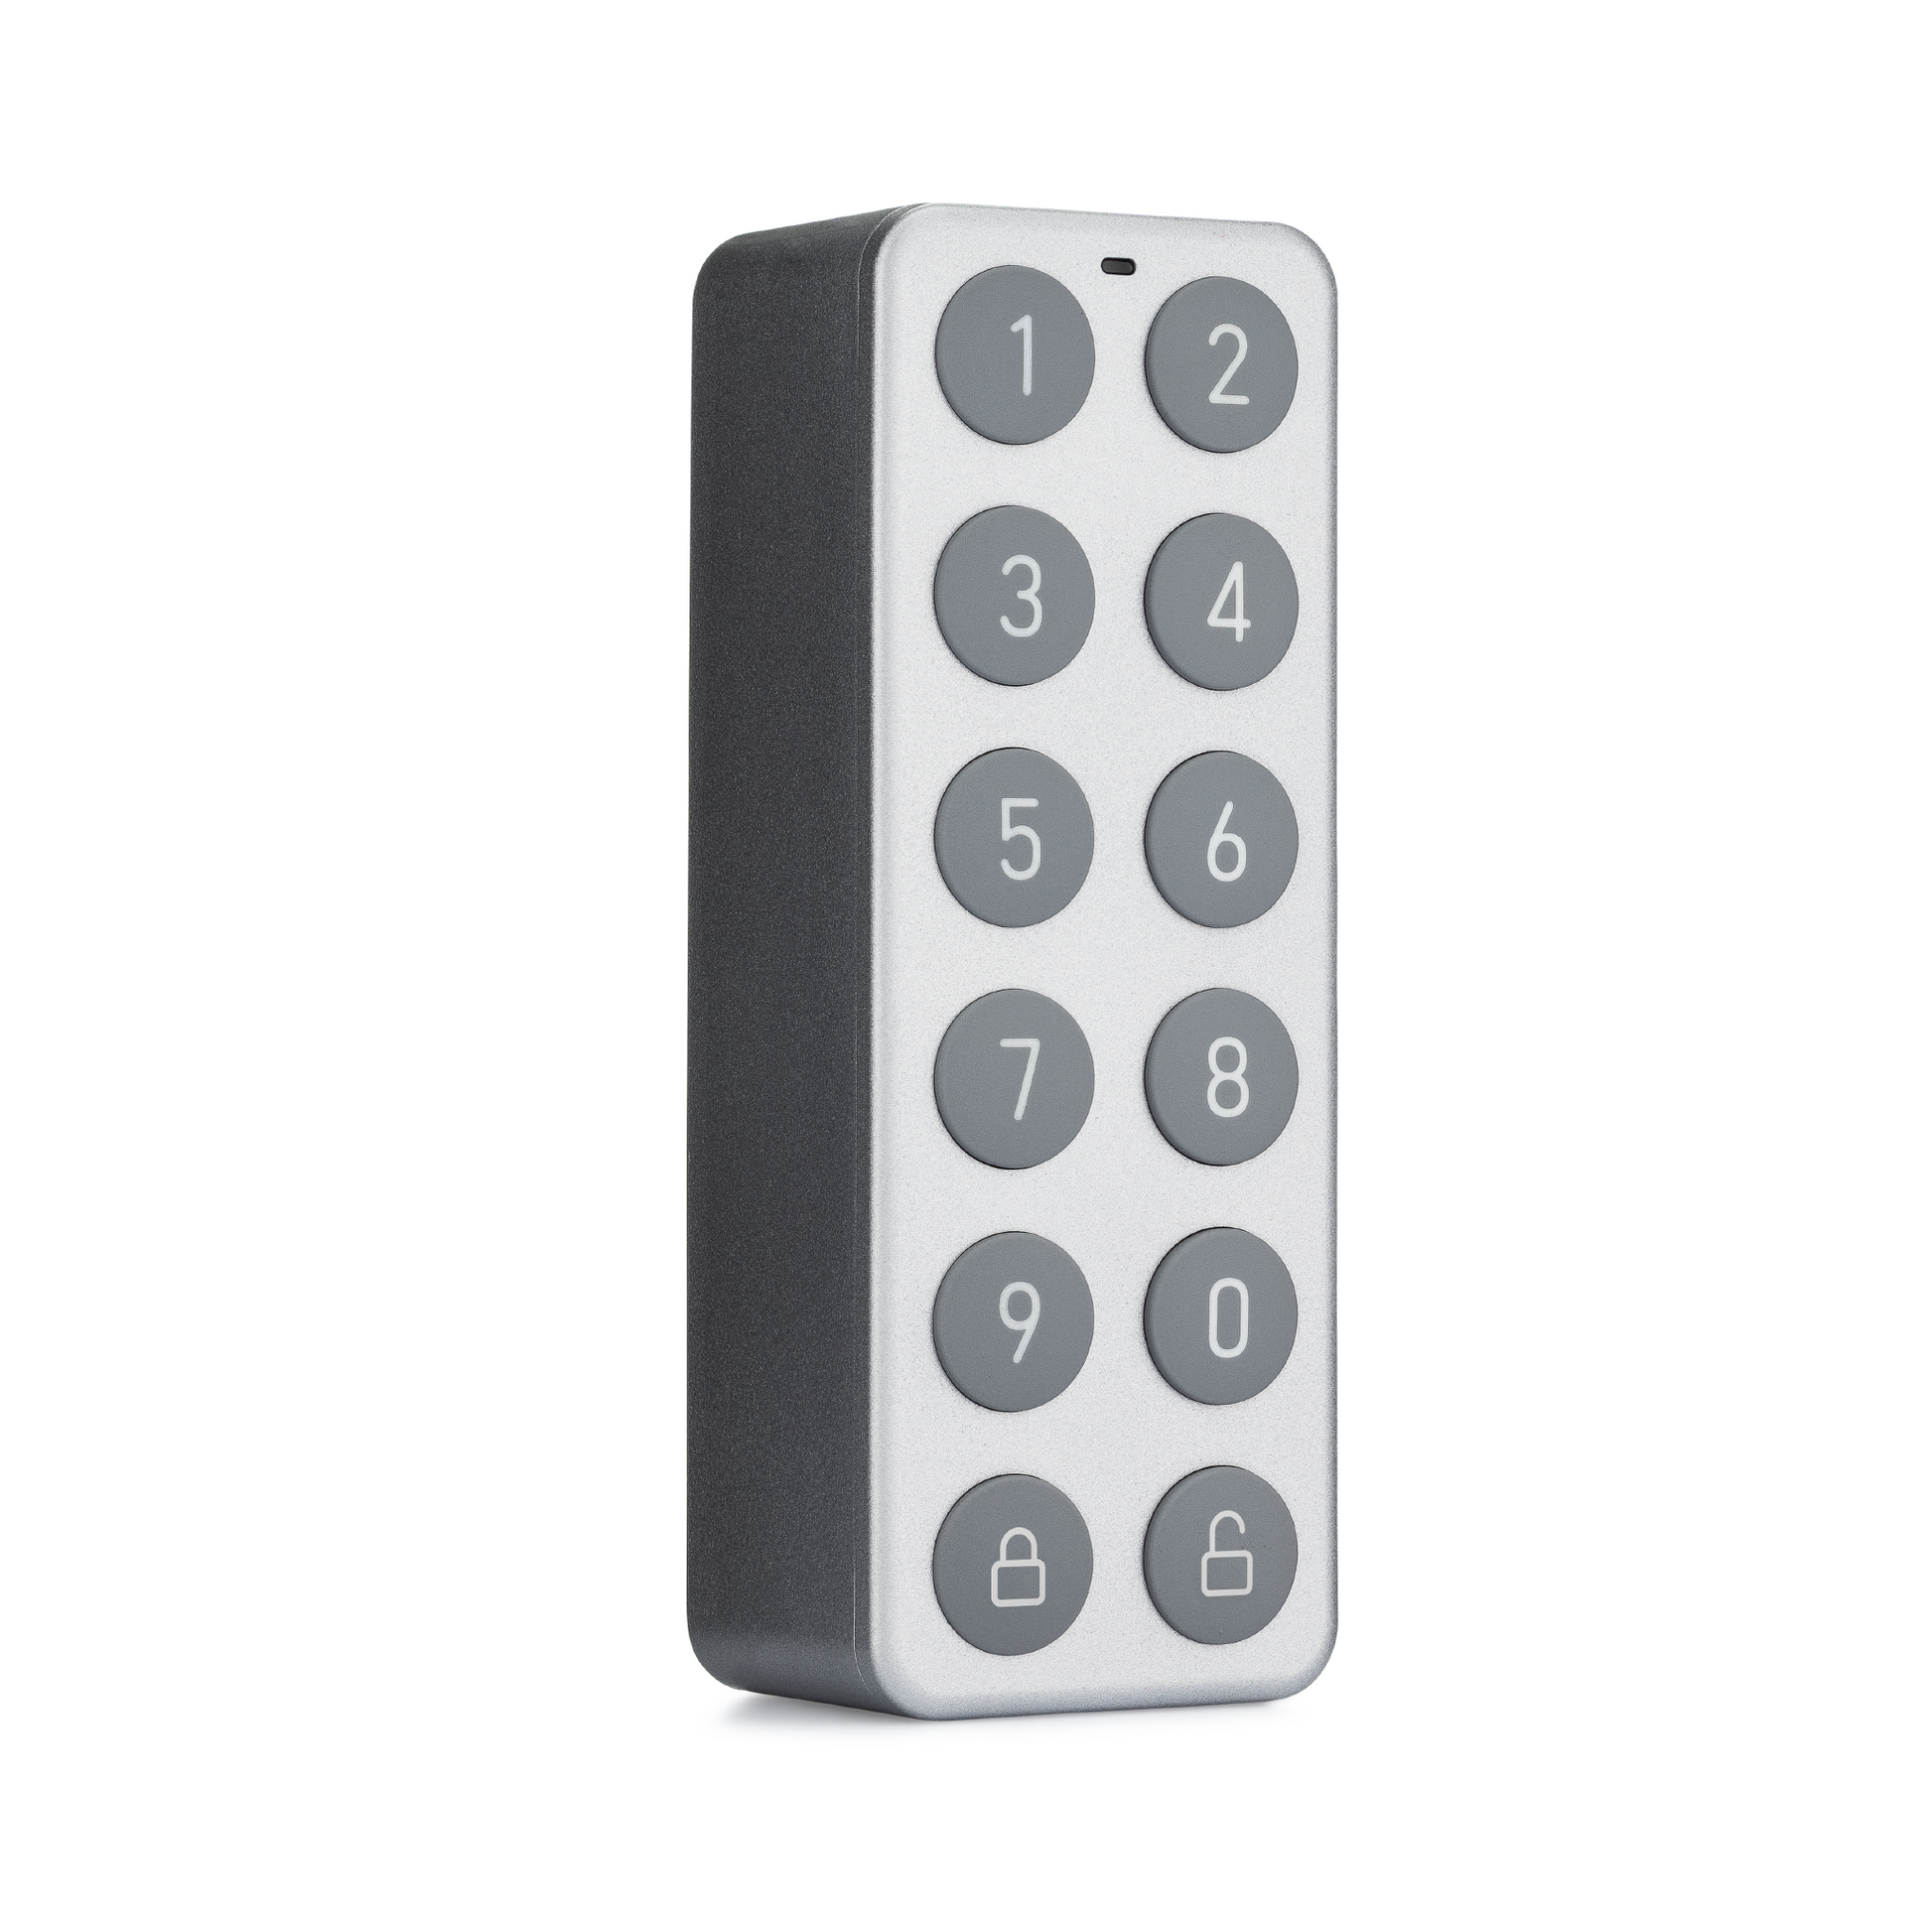 Angled front view of Wyze Lock Keypad